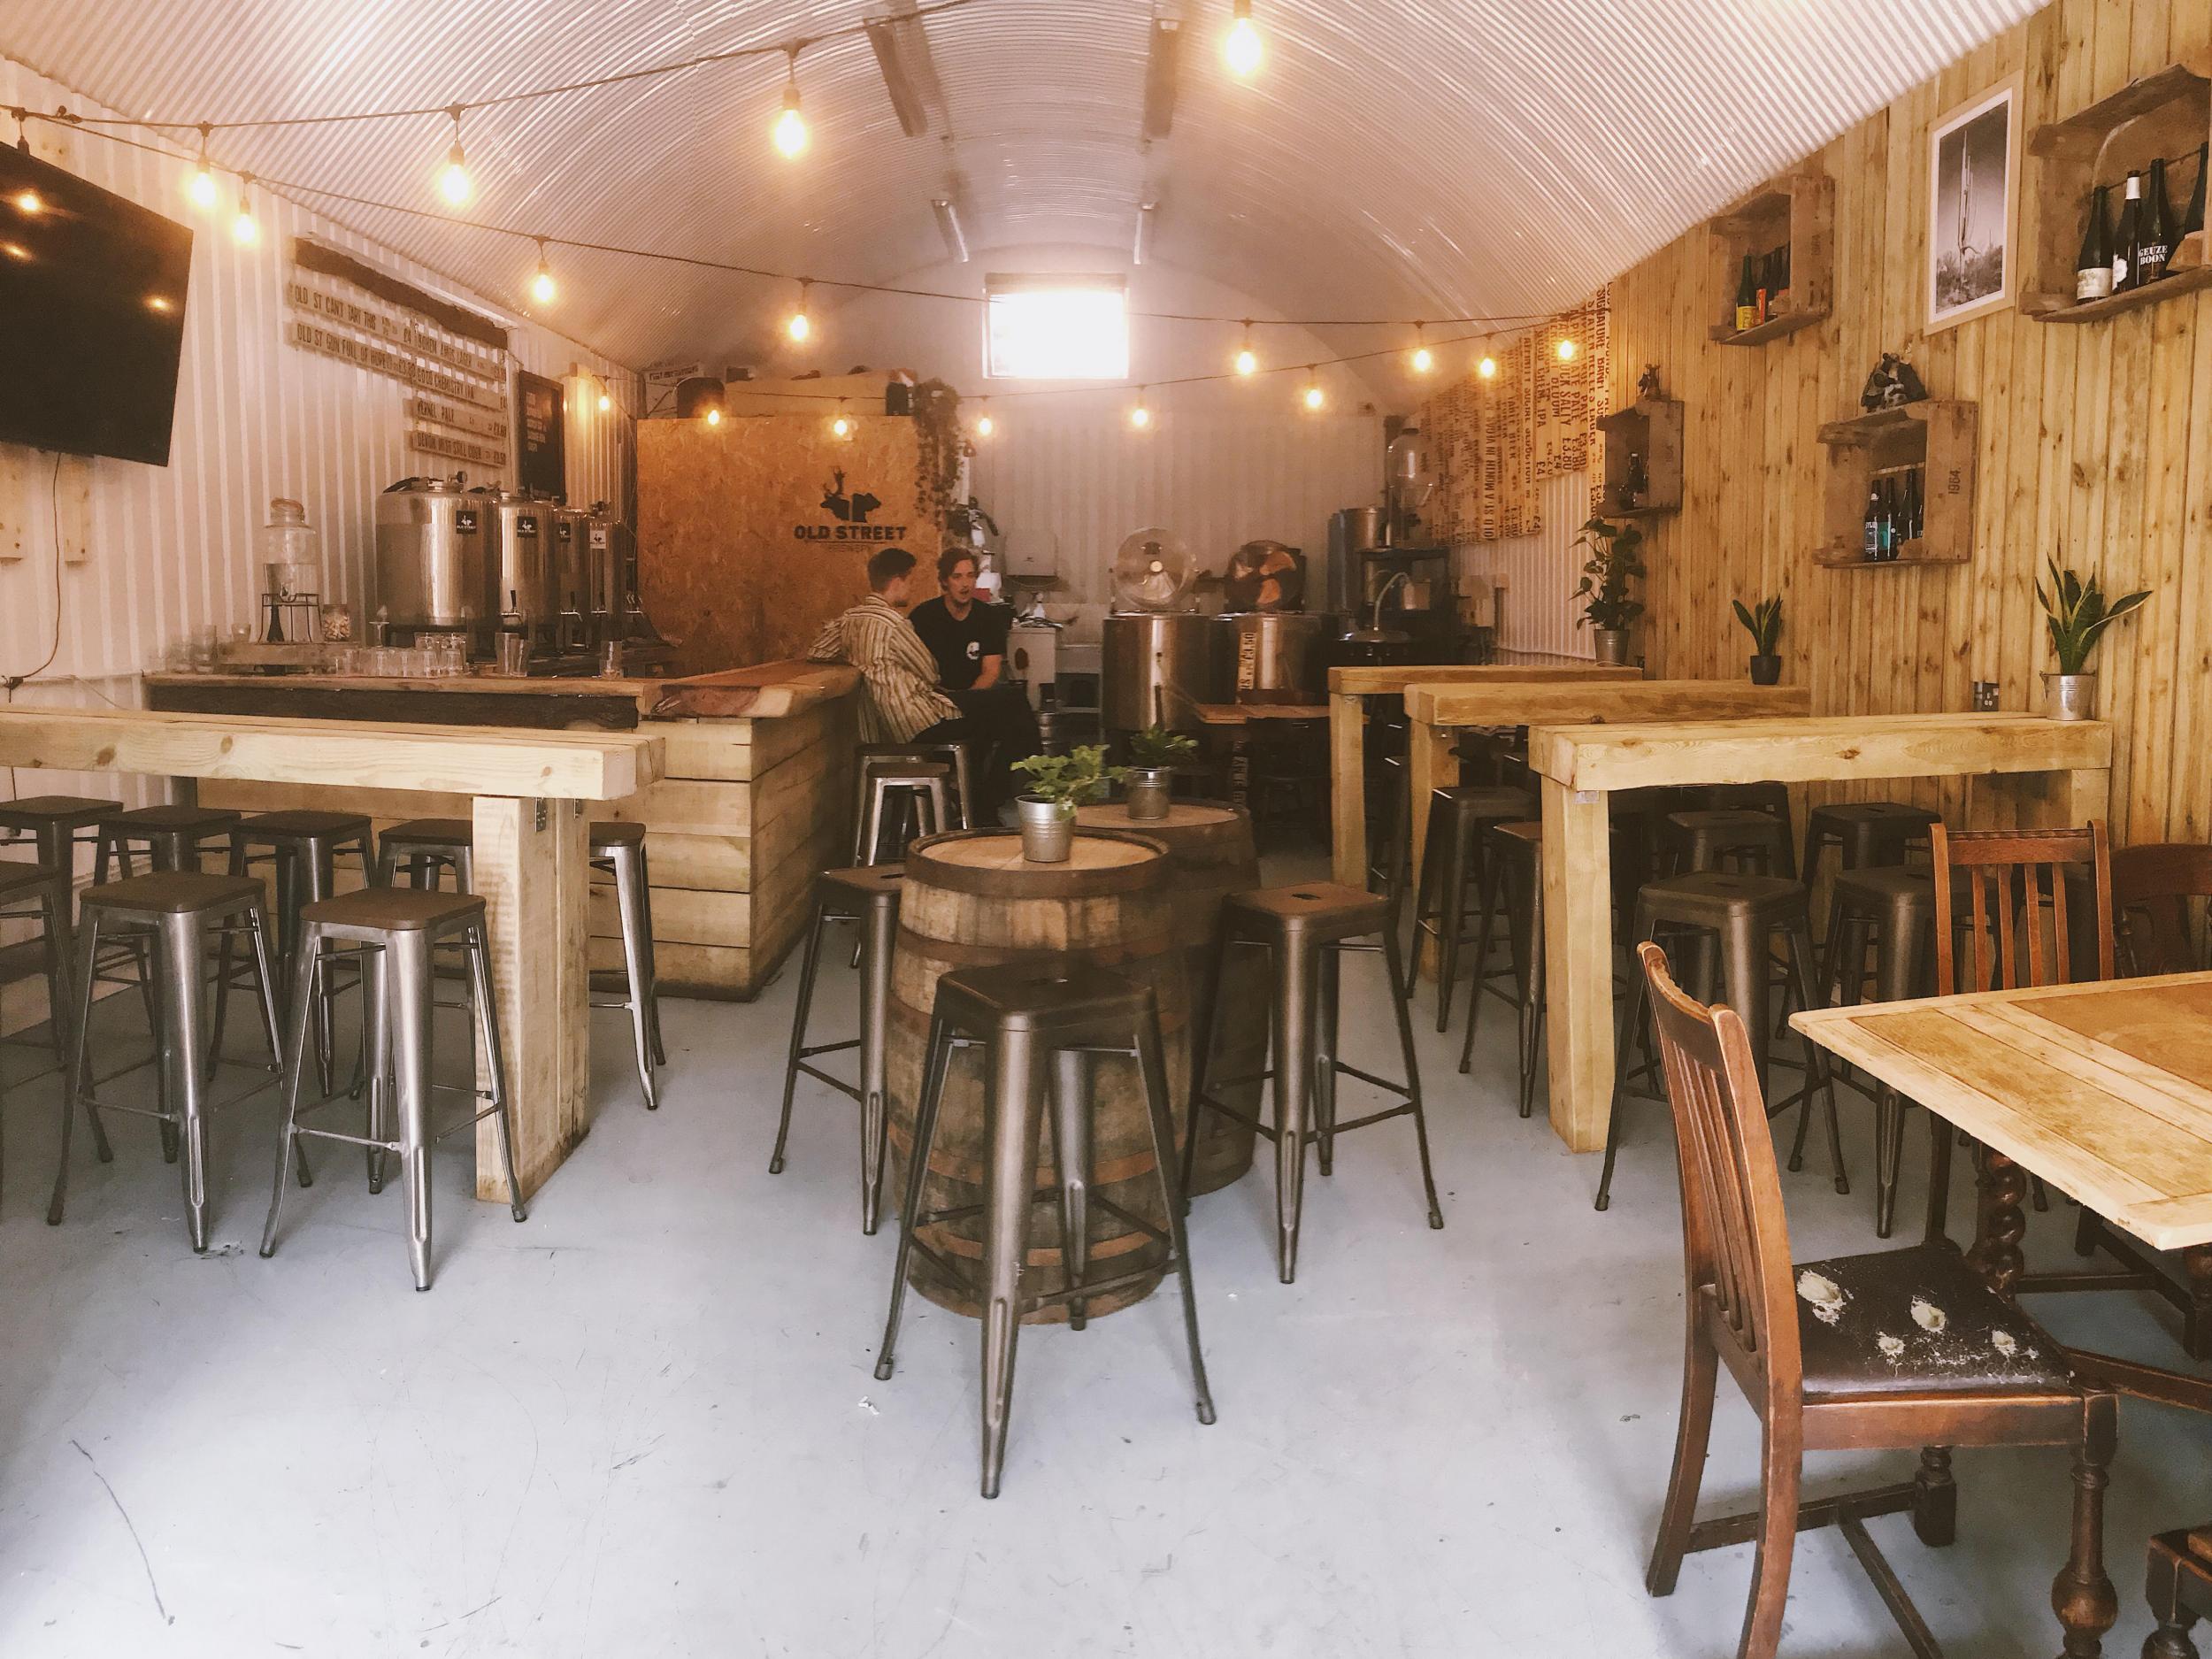 Old Street Brewery Taproom: four months old and tucked under an east London railway arch – a typical crafty watering hole where the beer is made on site